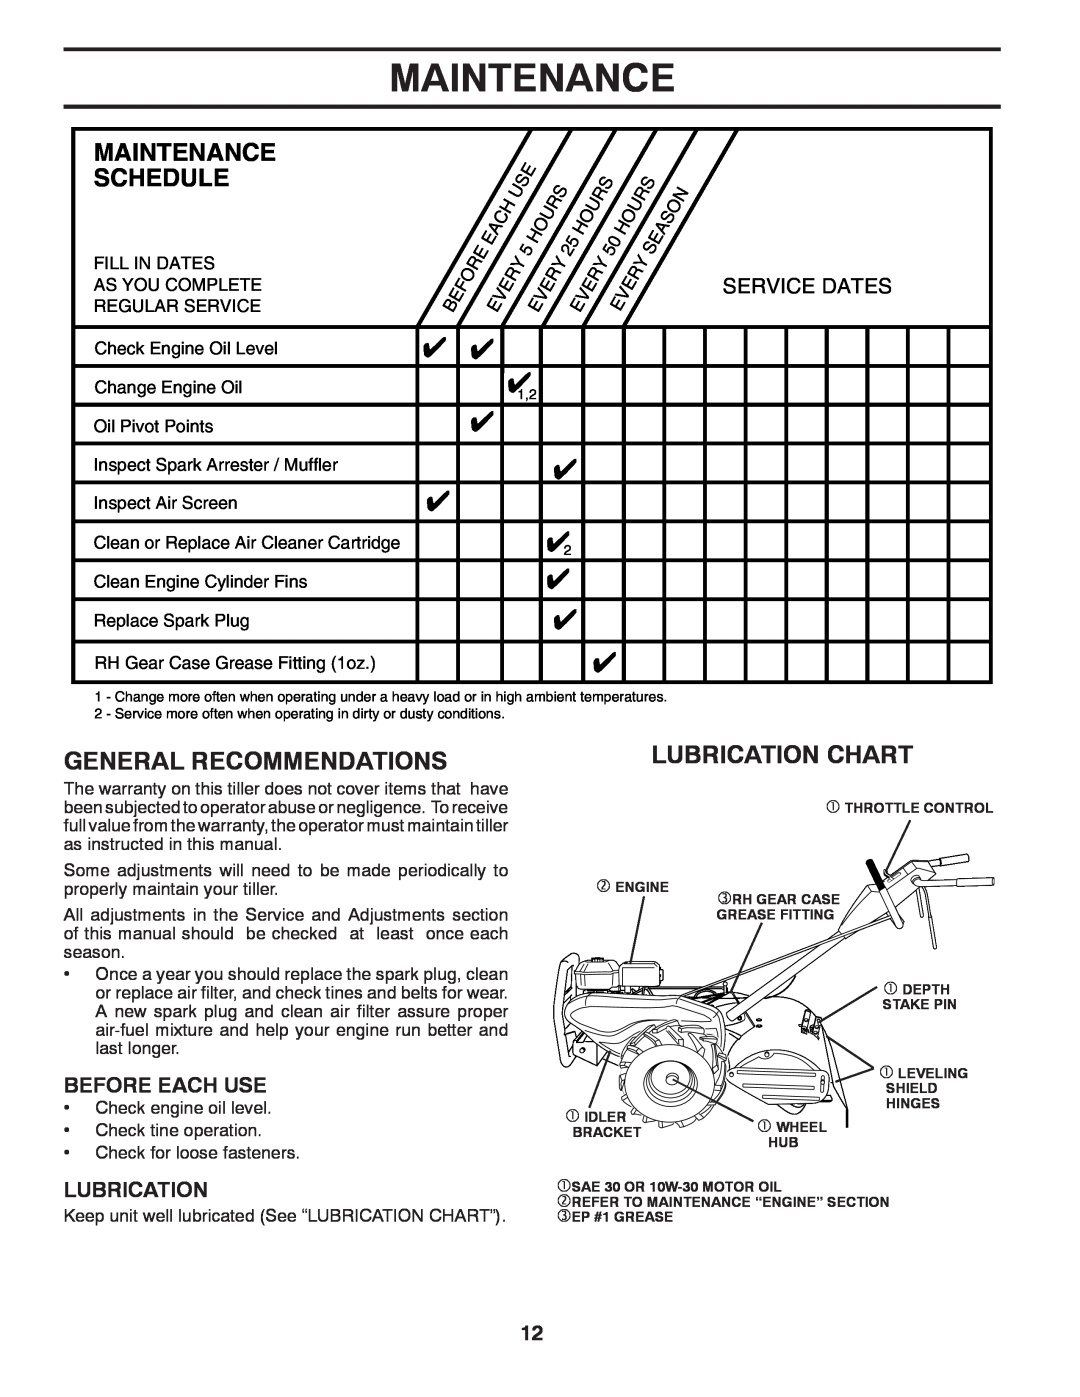 Poulan DRT900, 433154 Maintenance Schedule, General Recommendations, Lubrication Chart, Before Each Use, Service Dates 